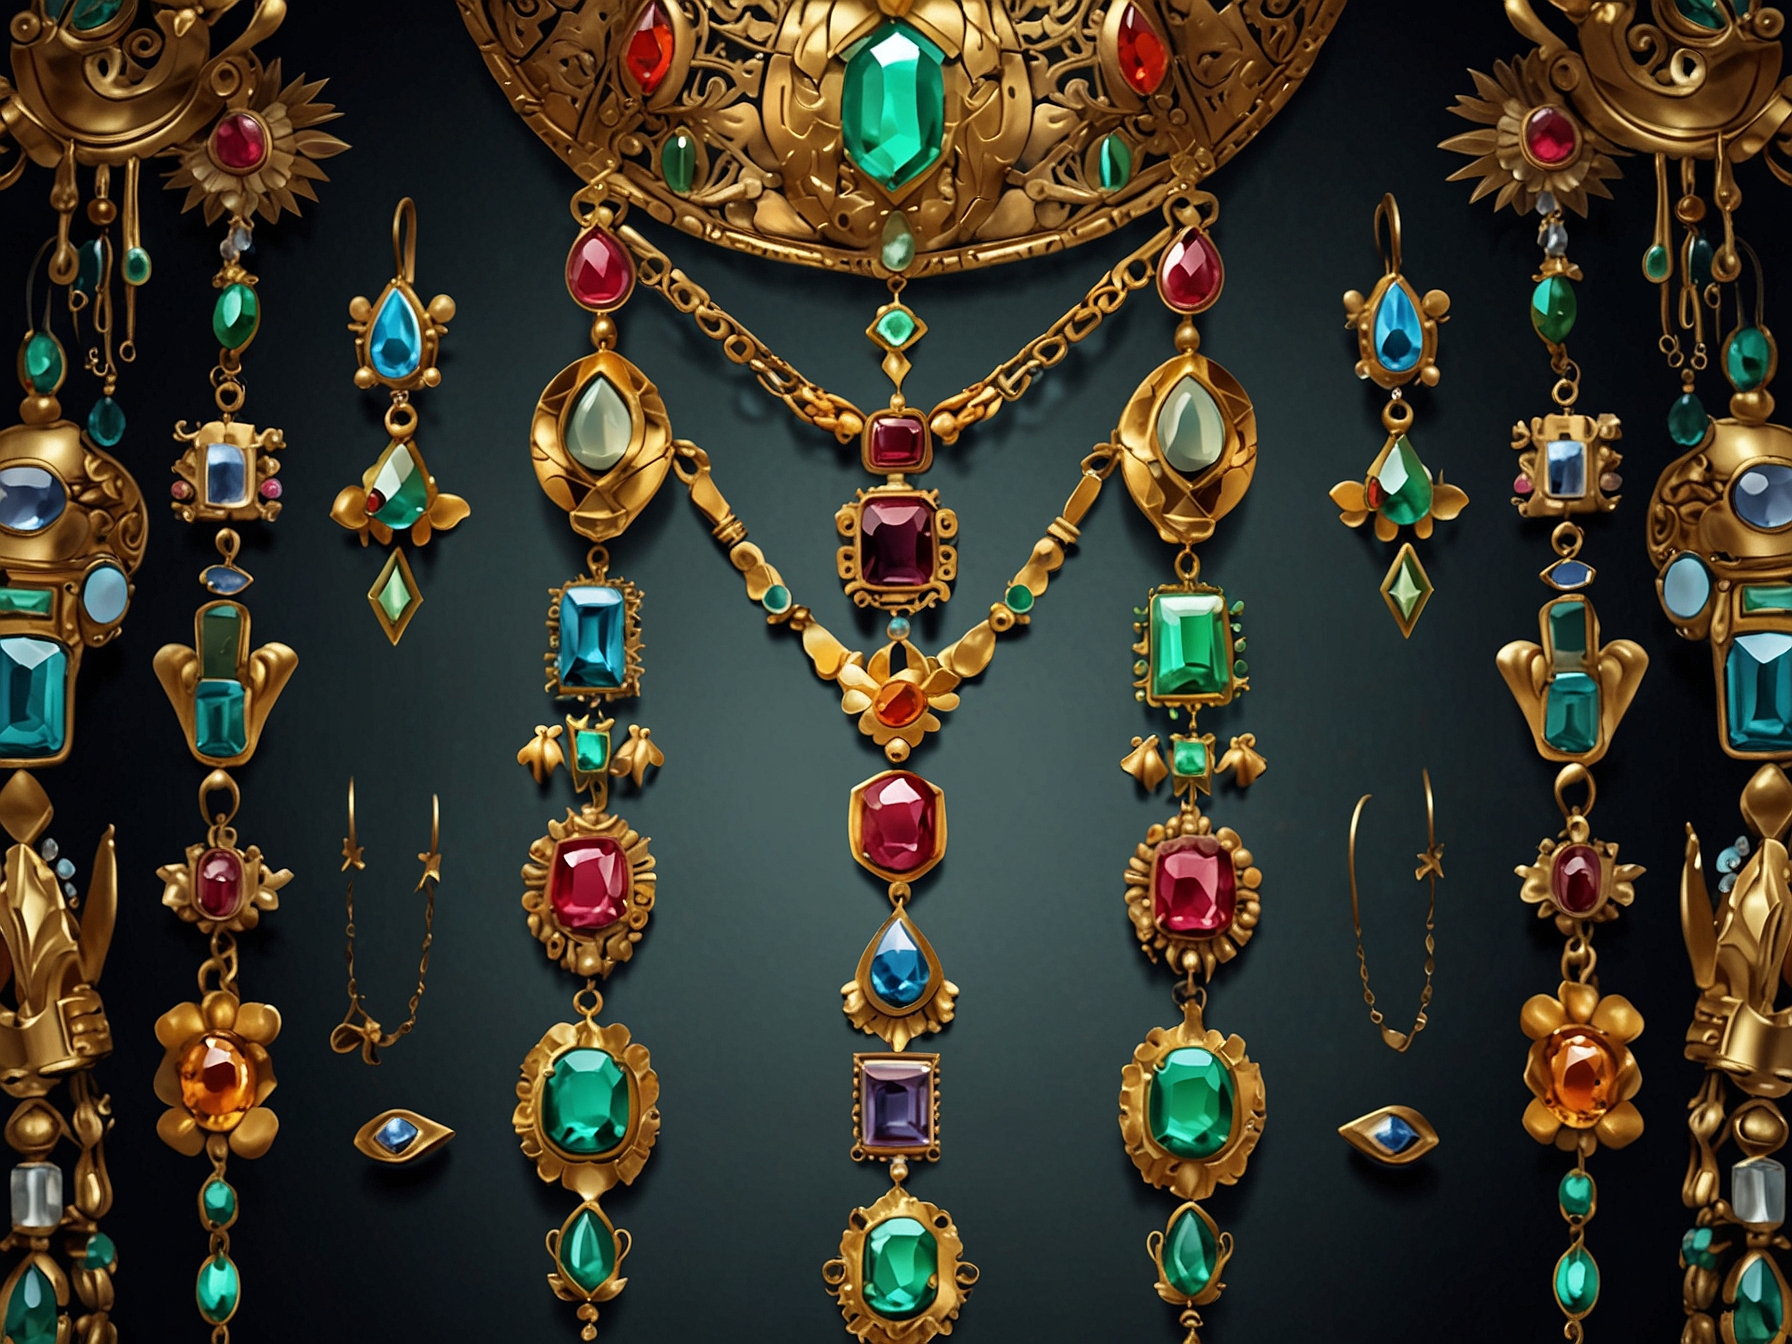 A stunning display featuring various bold and intricate jewelry pieces designed by Joyce Makitalo, showcasing her fusion of gemstones, brass, and gold inspired by ancient cultures and alchemy.